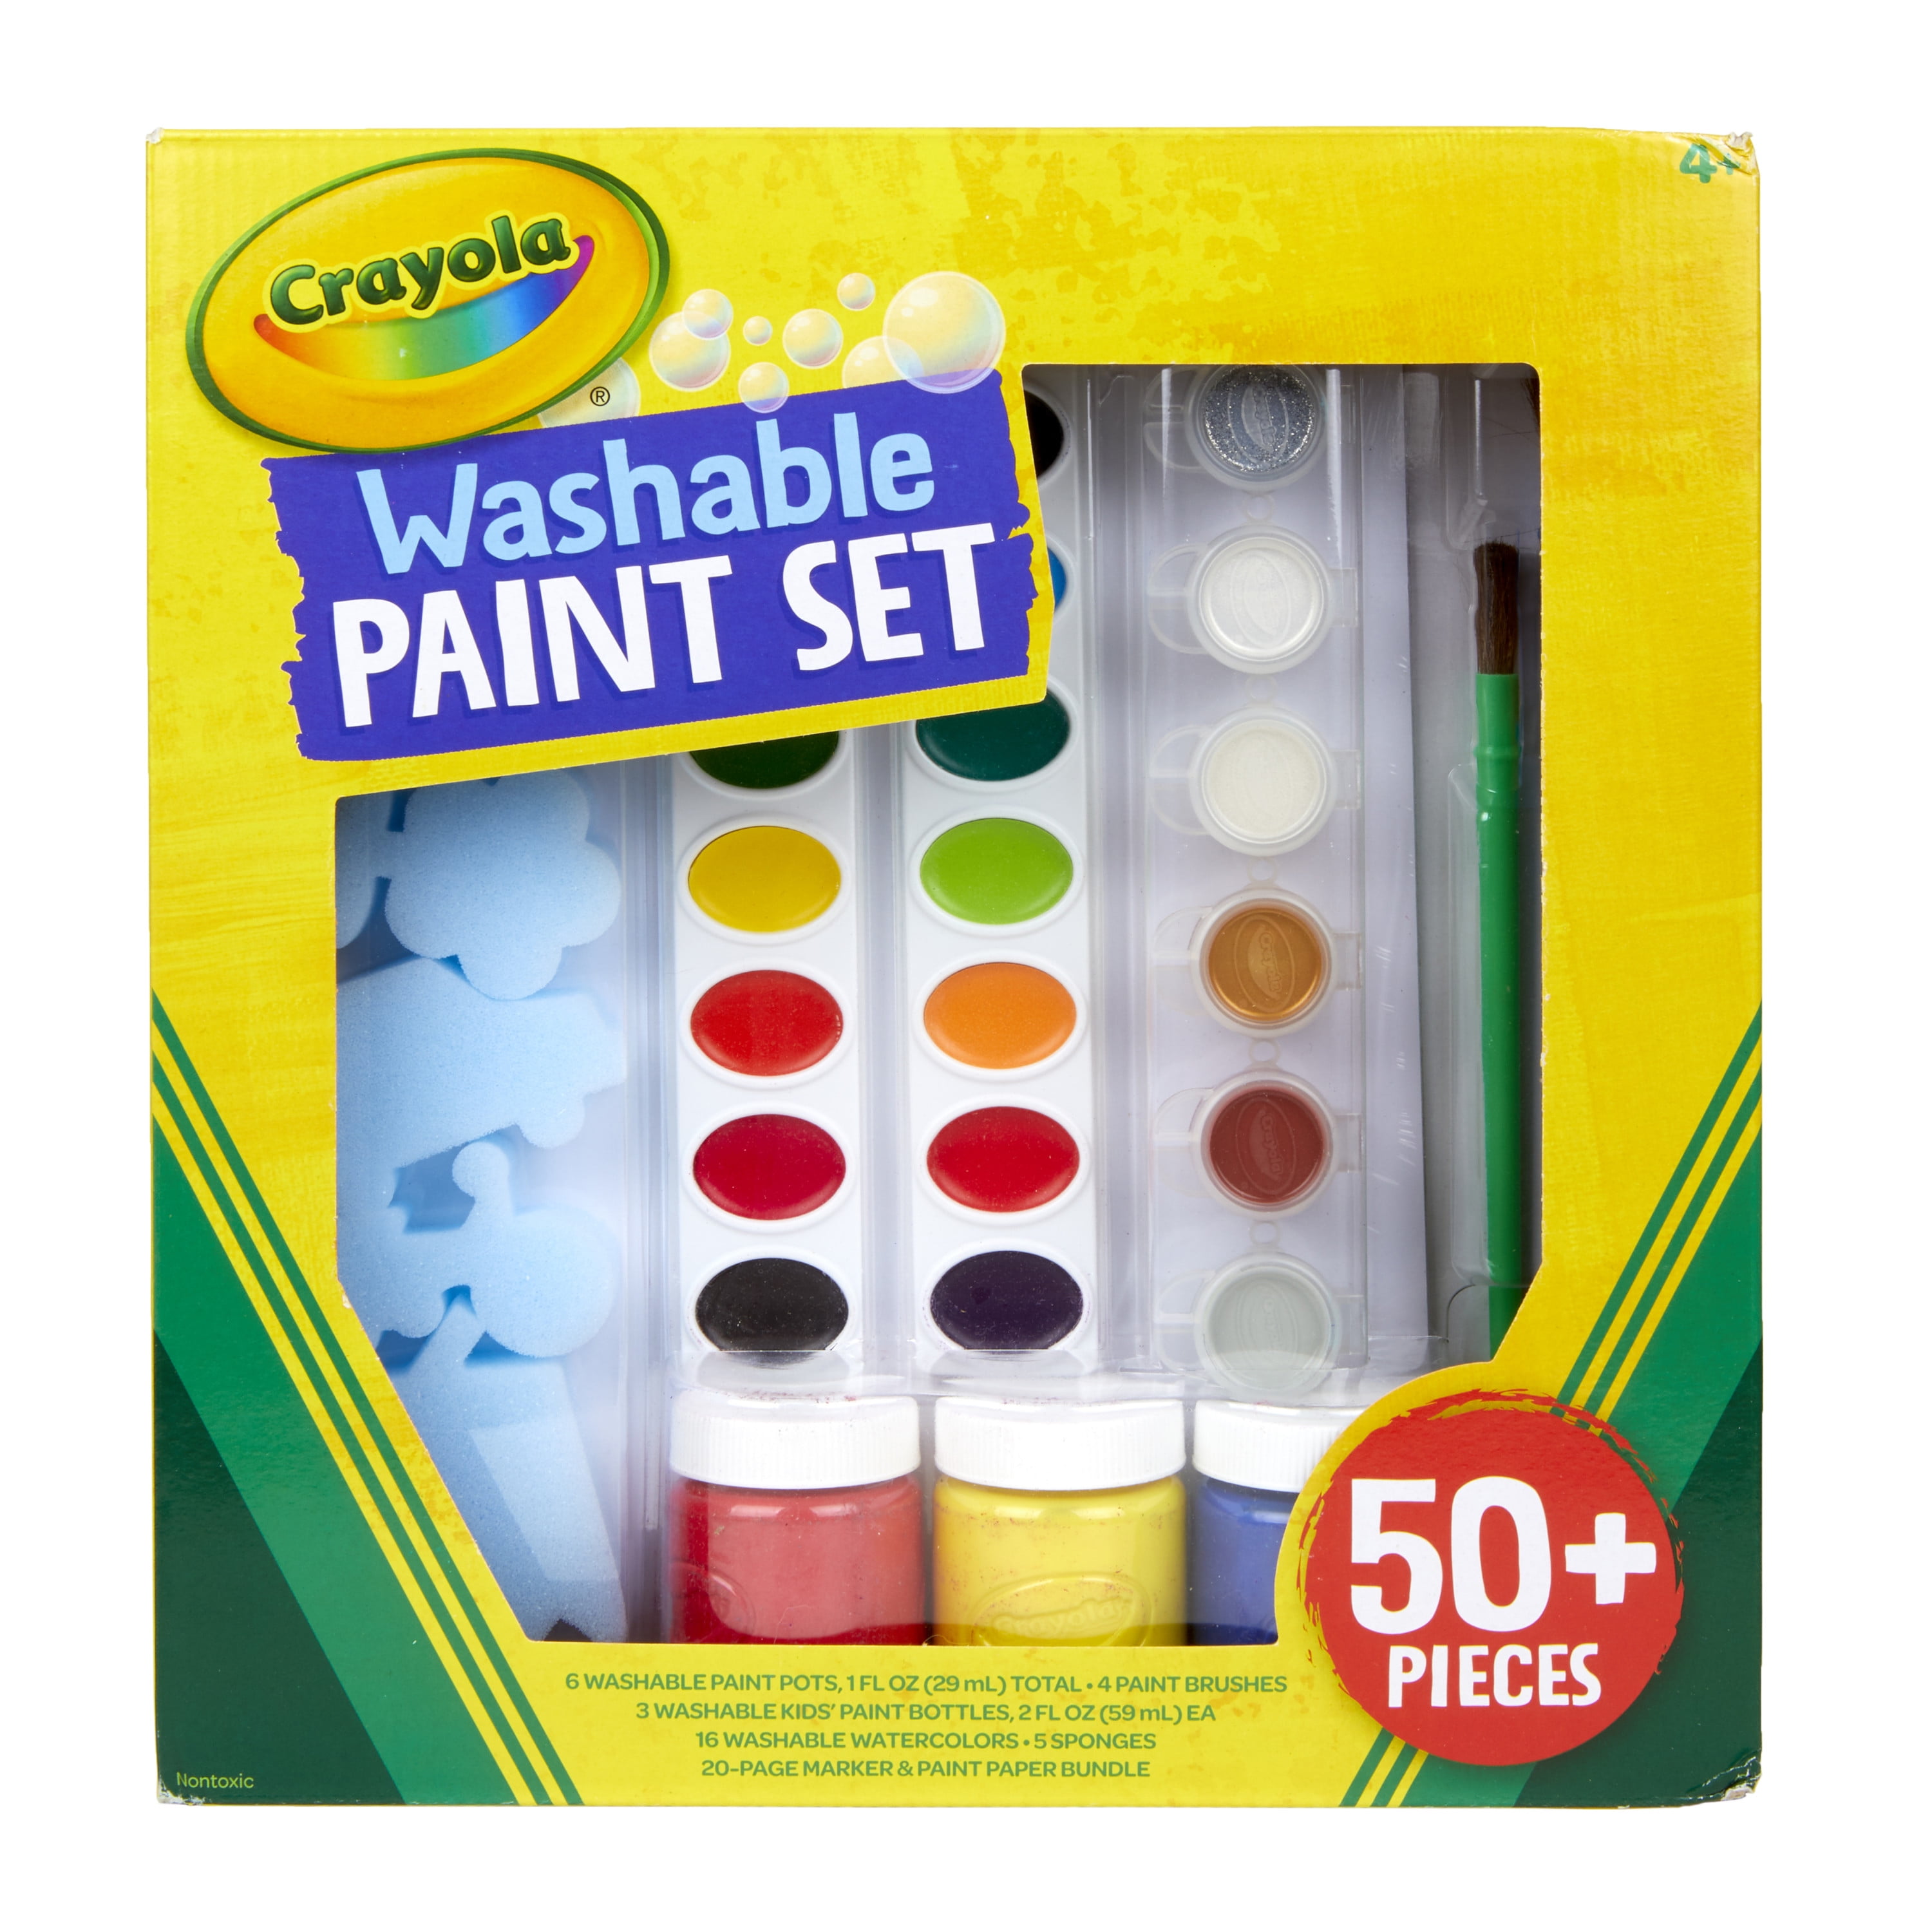  Watercolor Paint Sets Water Color Painting Kids Large Paint  Sets Large Watercolor Kids Paint Set 8 Colors with Paint Brush Washable  Watercolor Paint for Kids (24 Pack) : Toys & Games